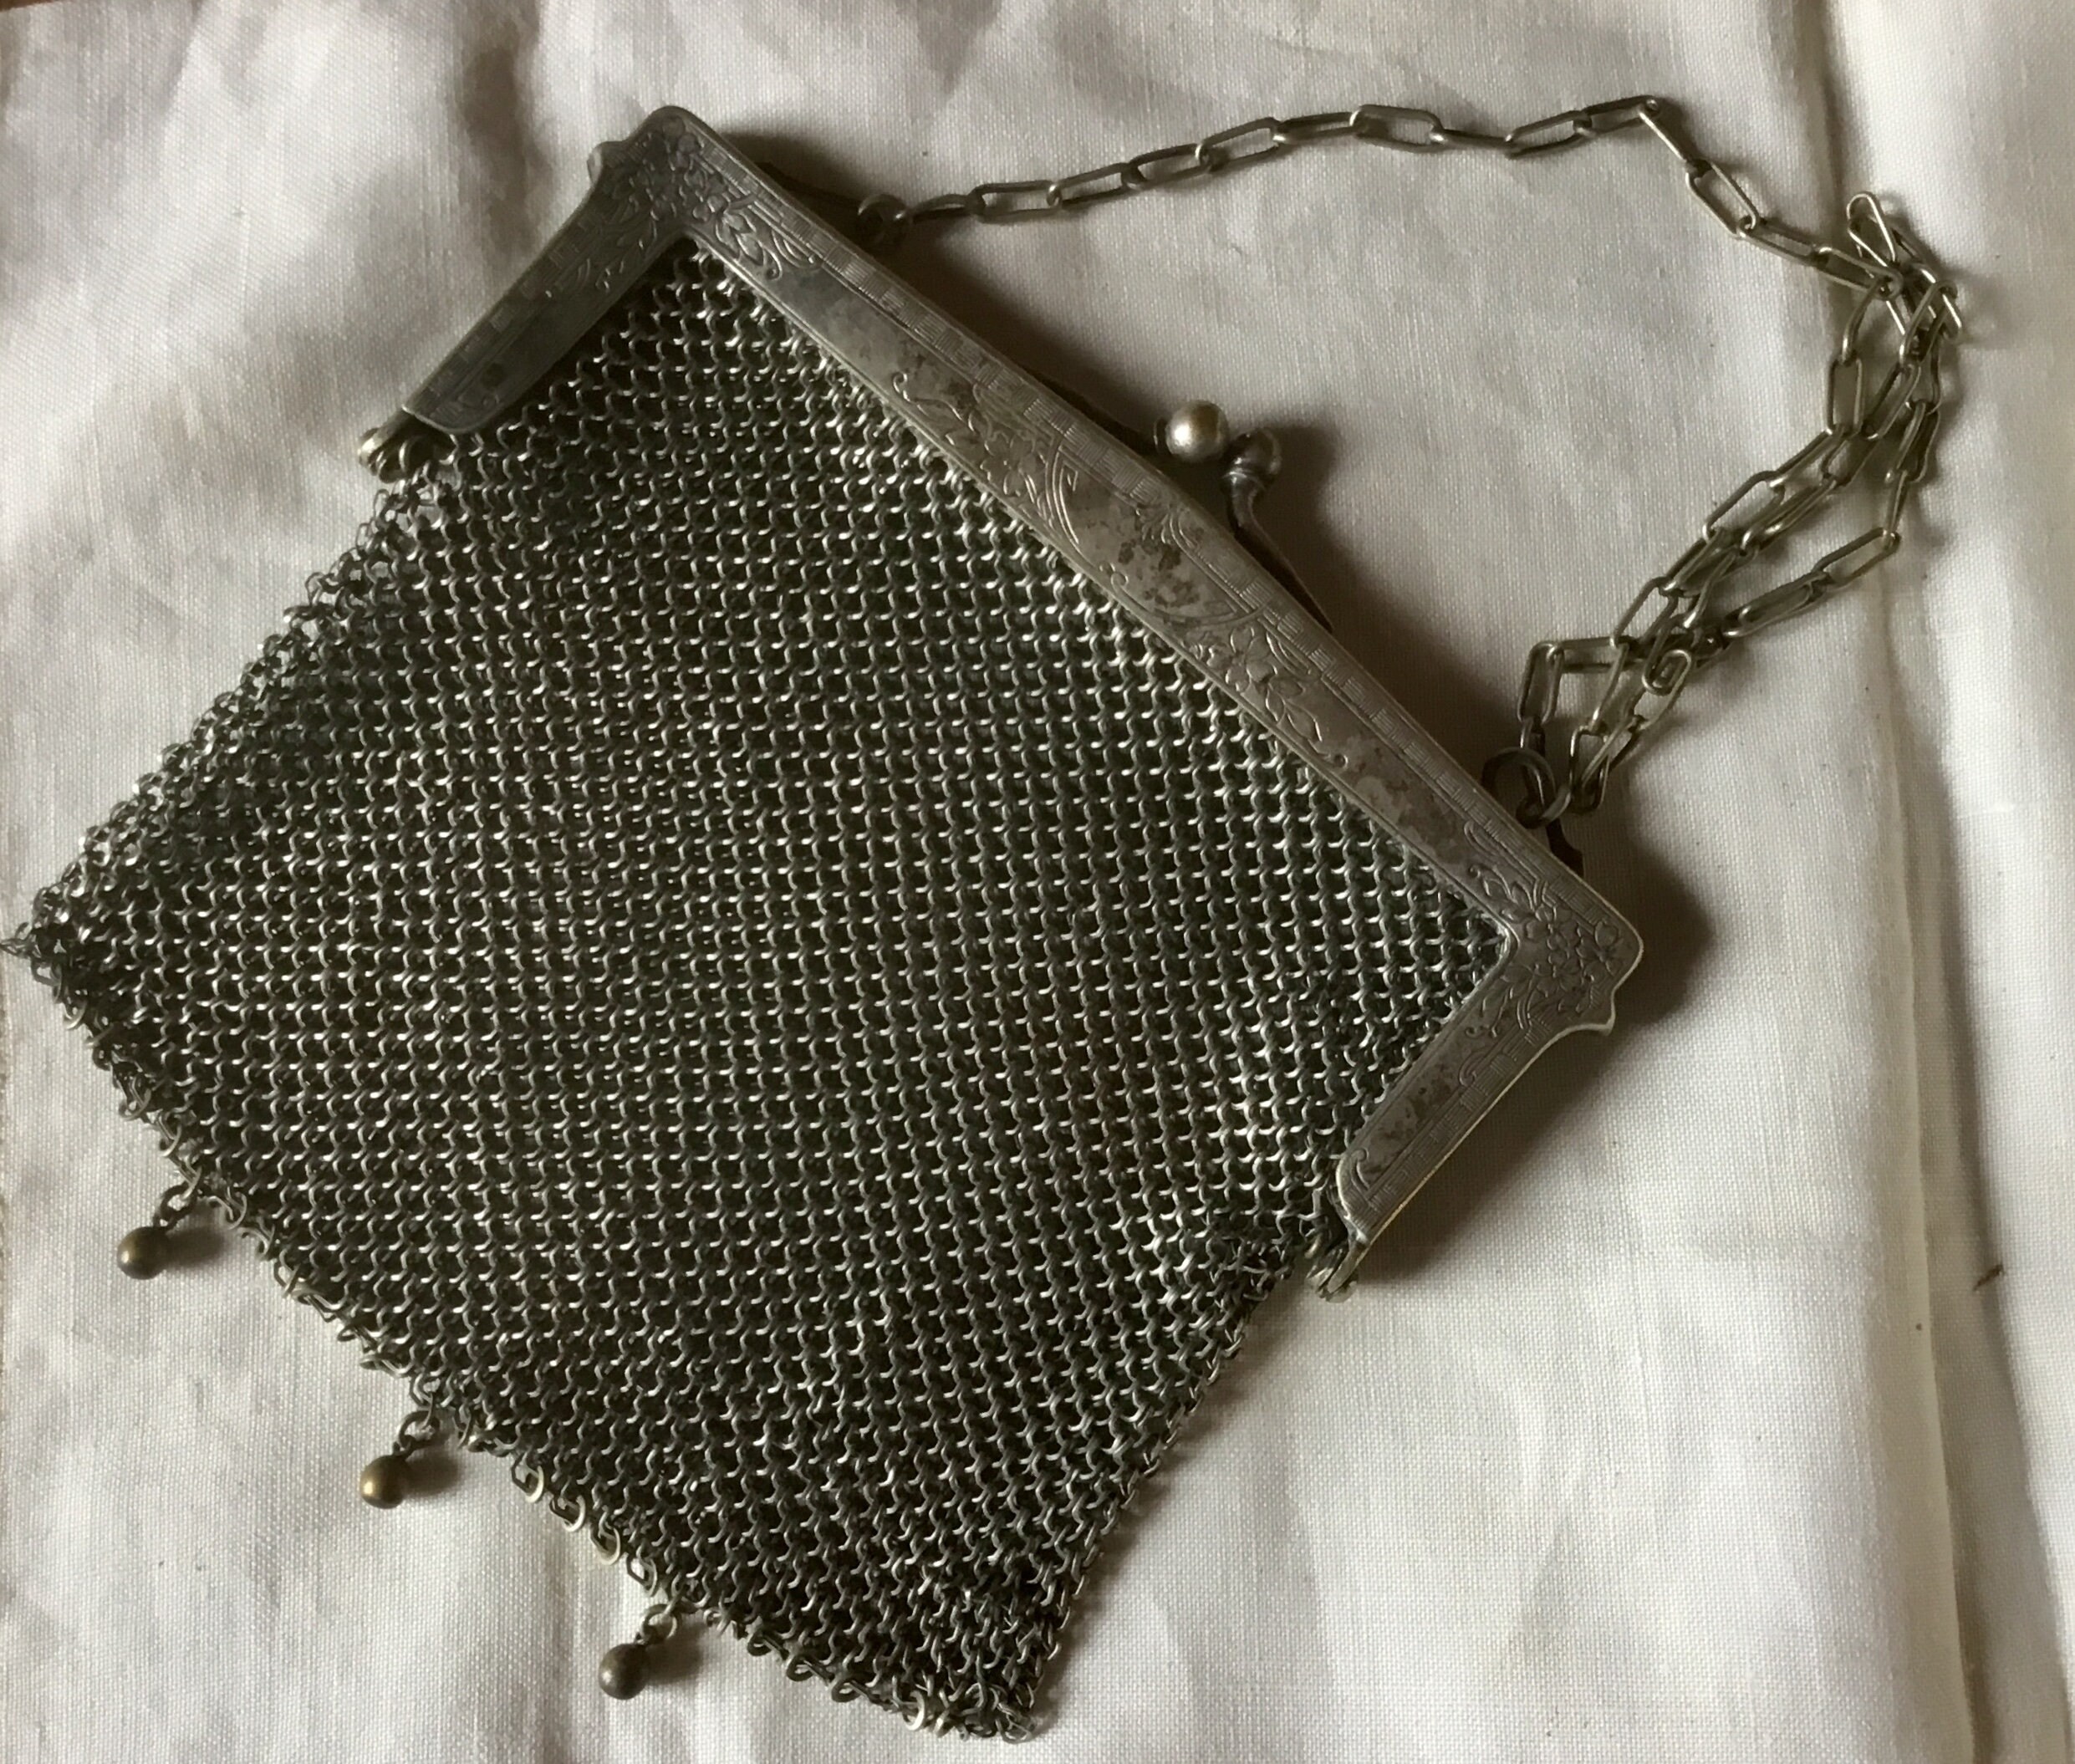 Sold at Auction: Antique German Silver Chain Mail Purse